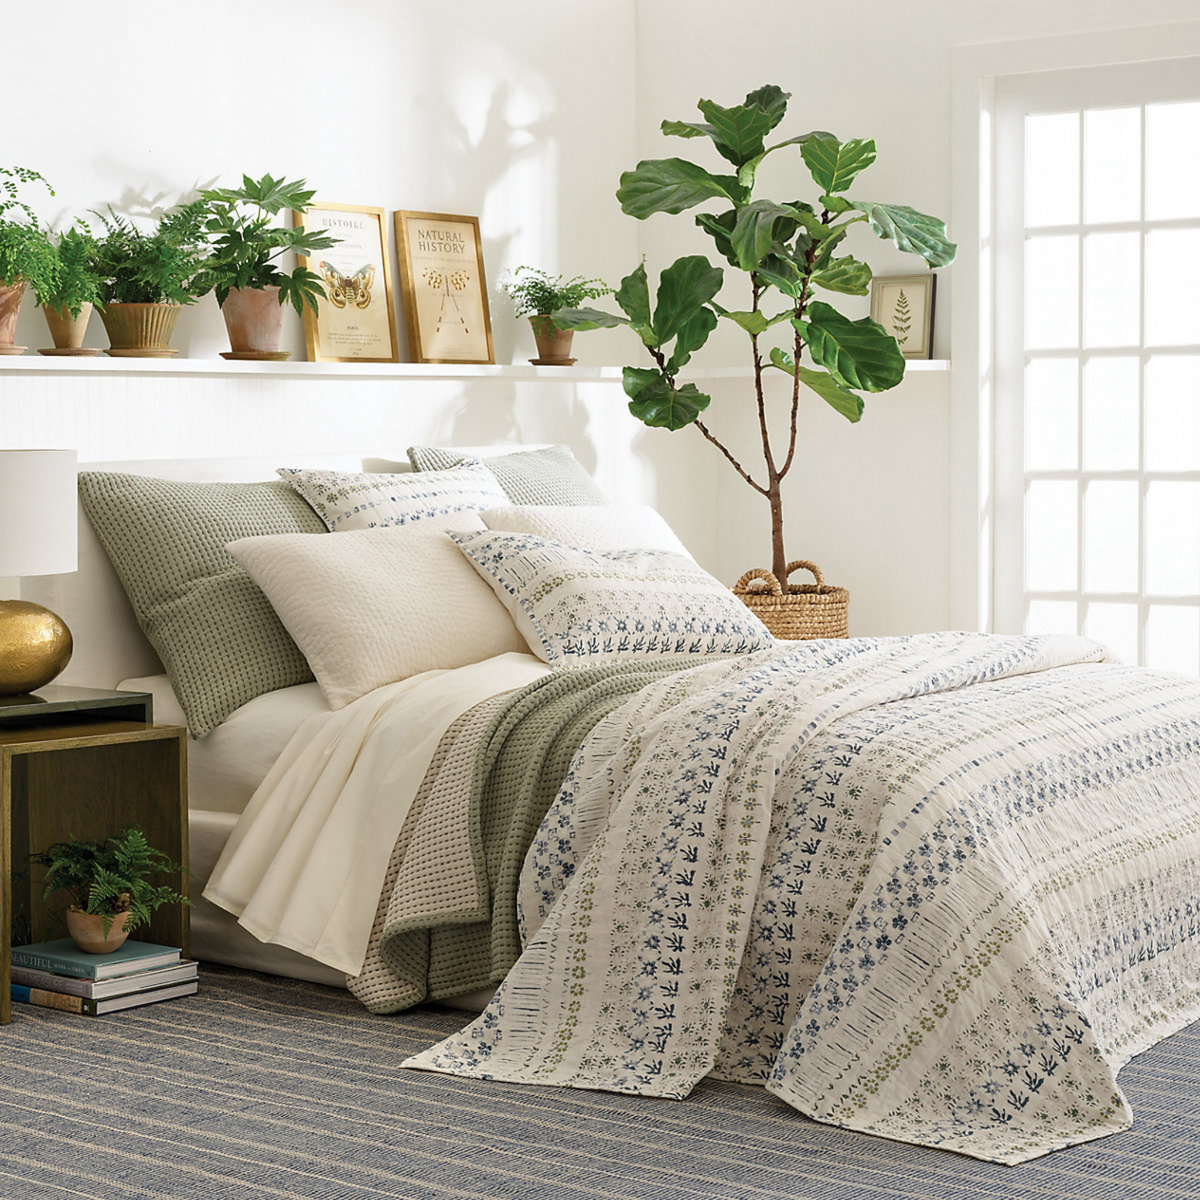 Bed Dressed in Evergreen Pine Cone Hill Pick Stitch Matelassé Coverlet &amp; Shams with Coordinates 